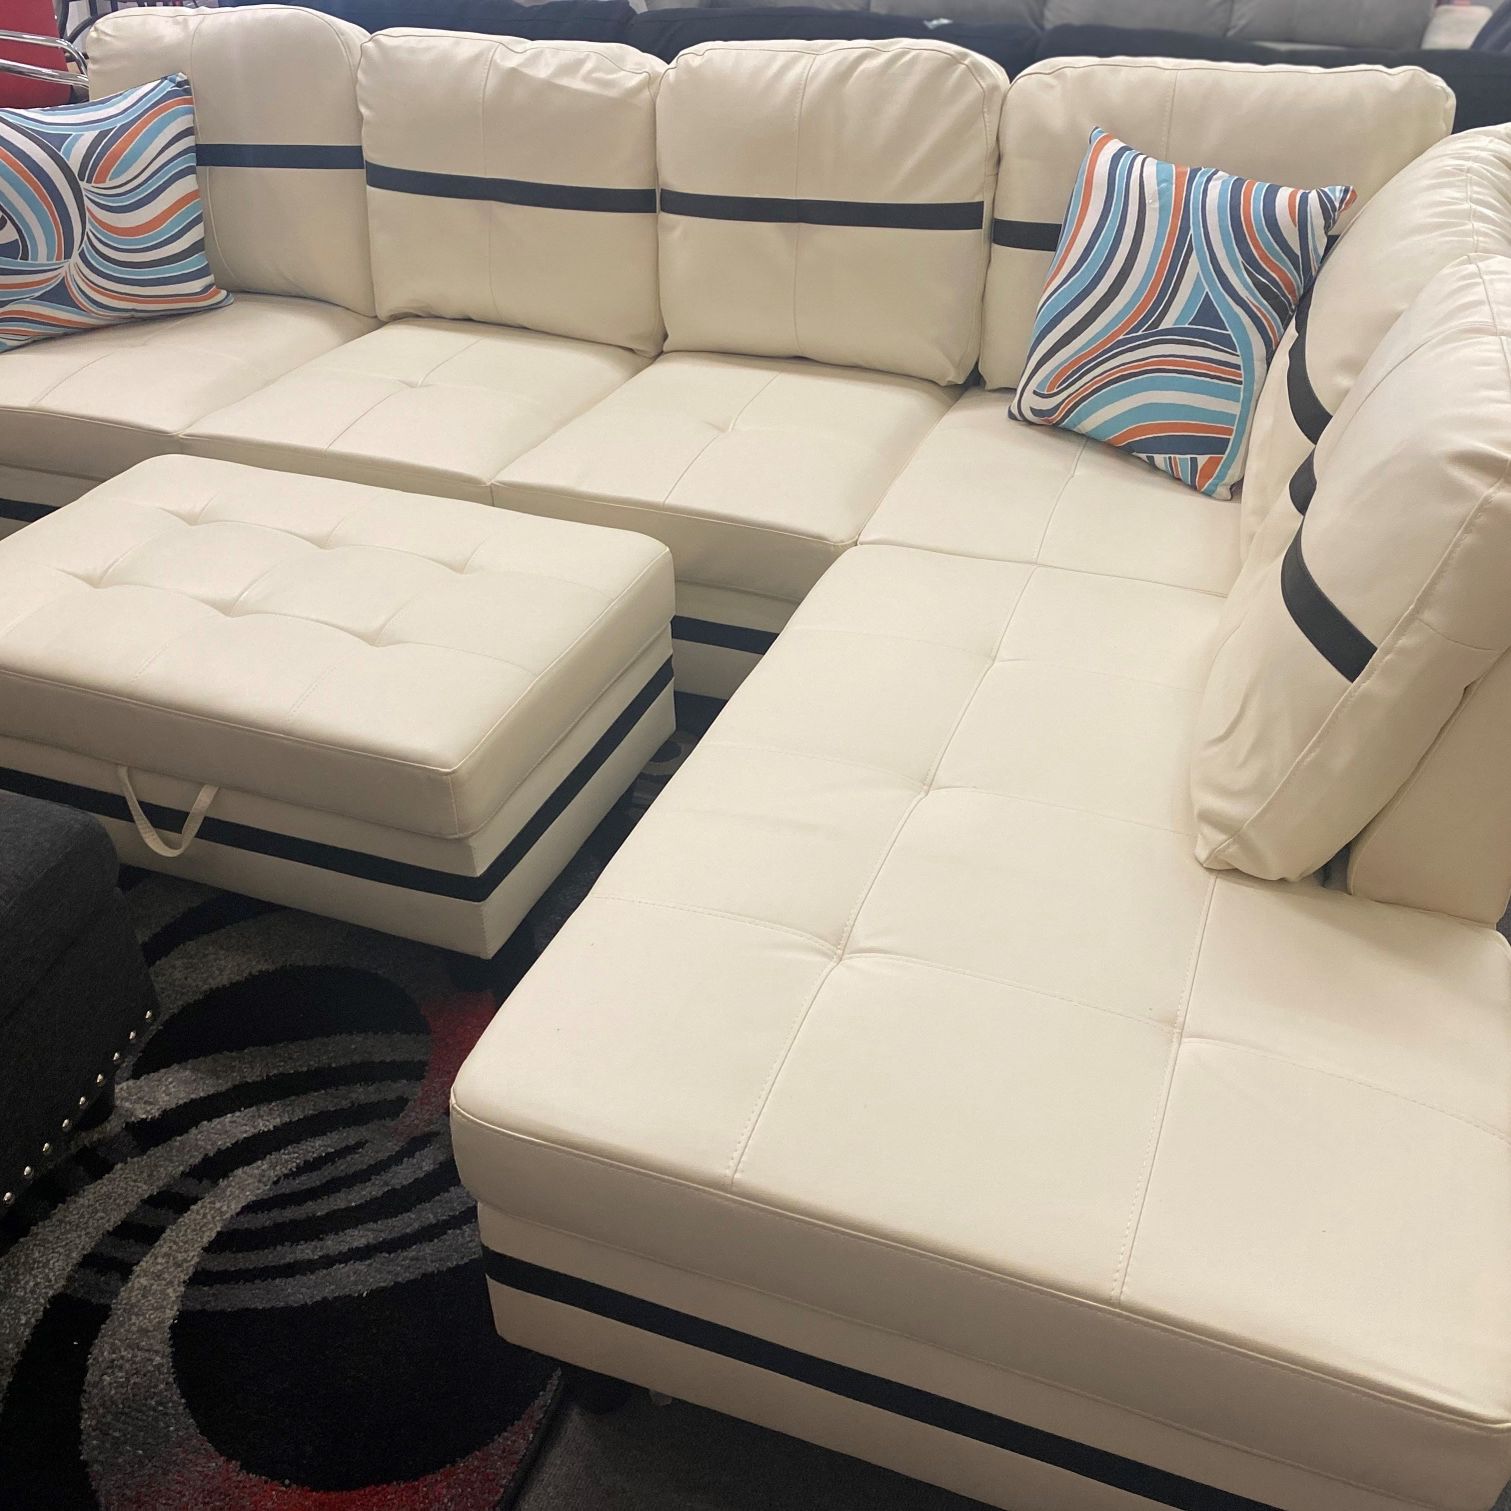 NEW OFFER!✨✨White Sectional Sofa Set w/ Ottoman (Right Chaise)✨Easy Pau Options✨Delivery Express✨